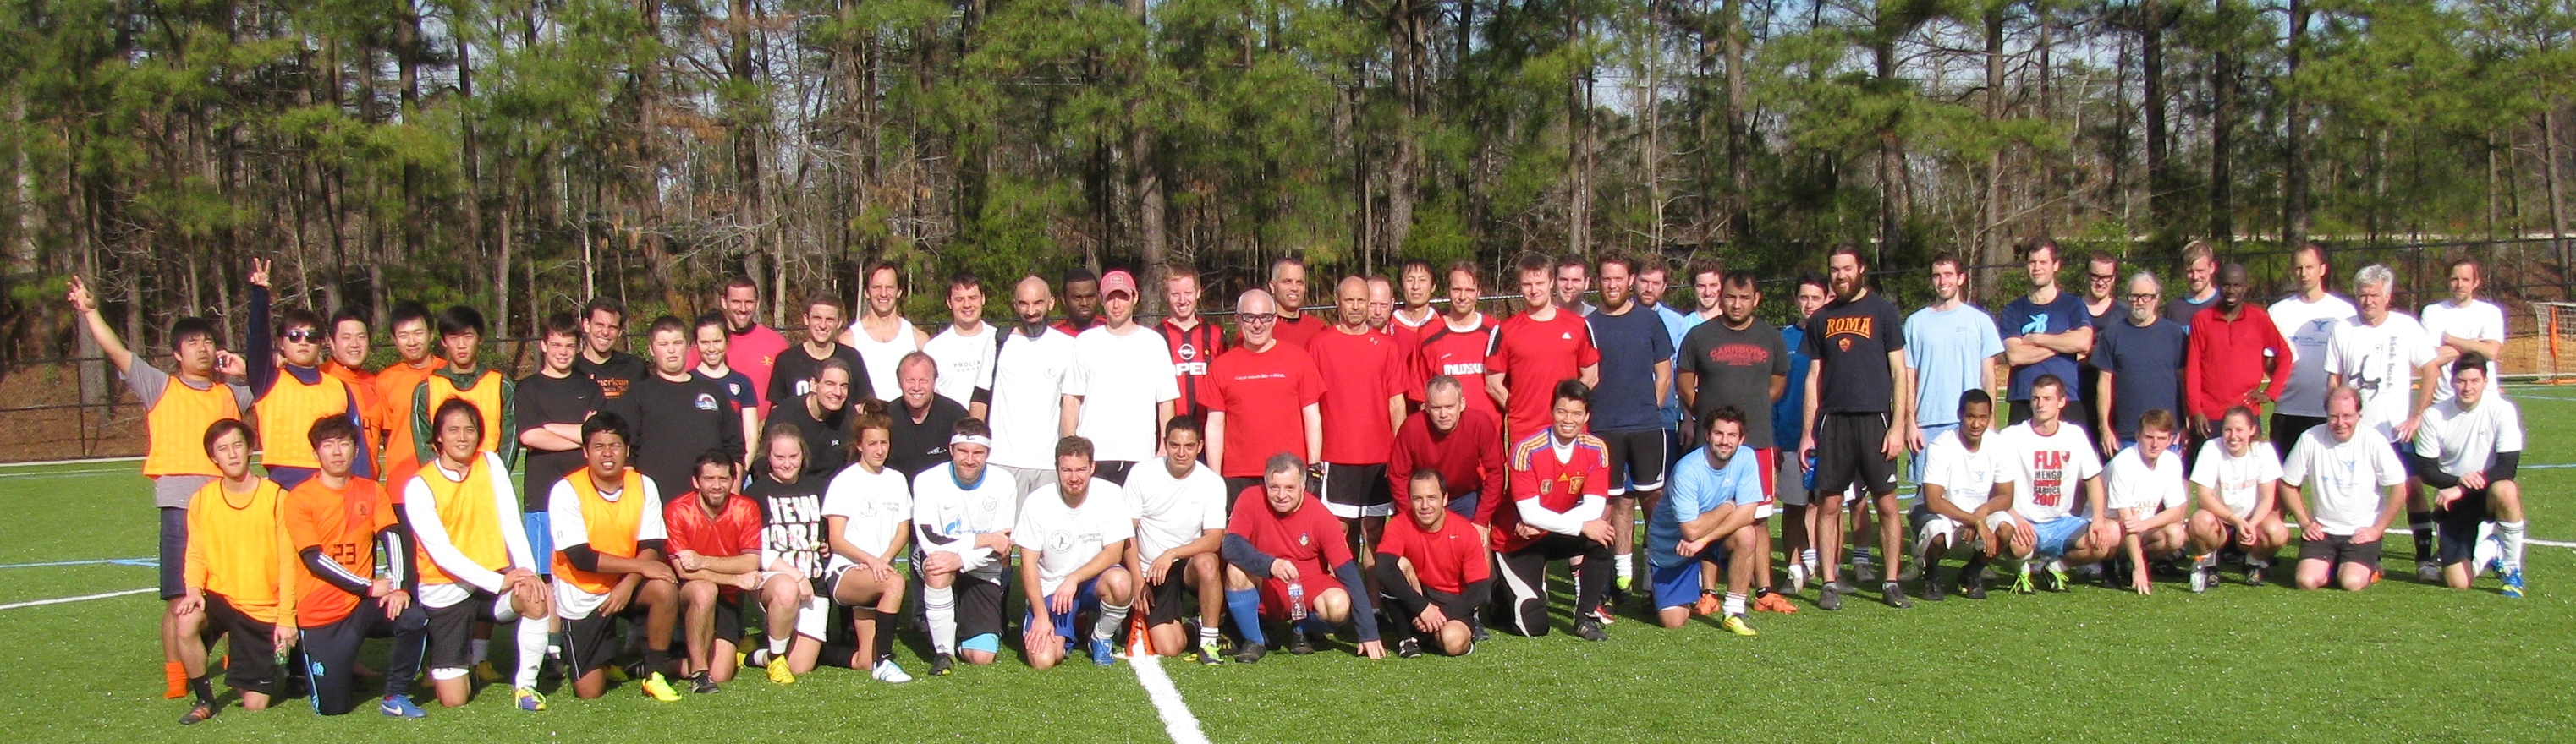 Players in the 2013 Winter Blast Tournament